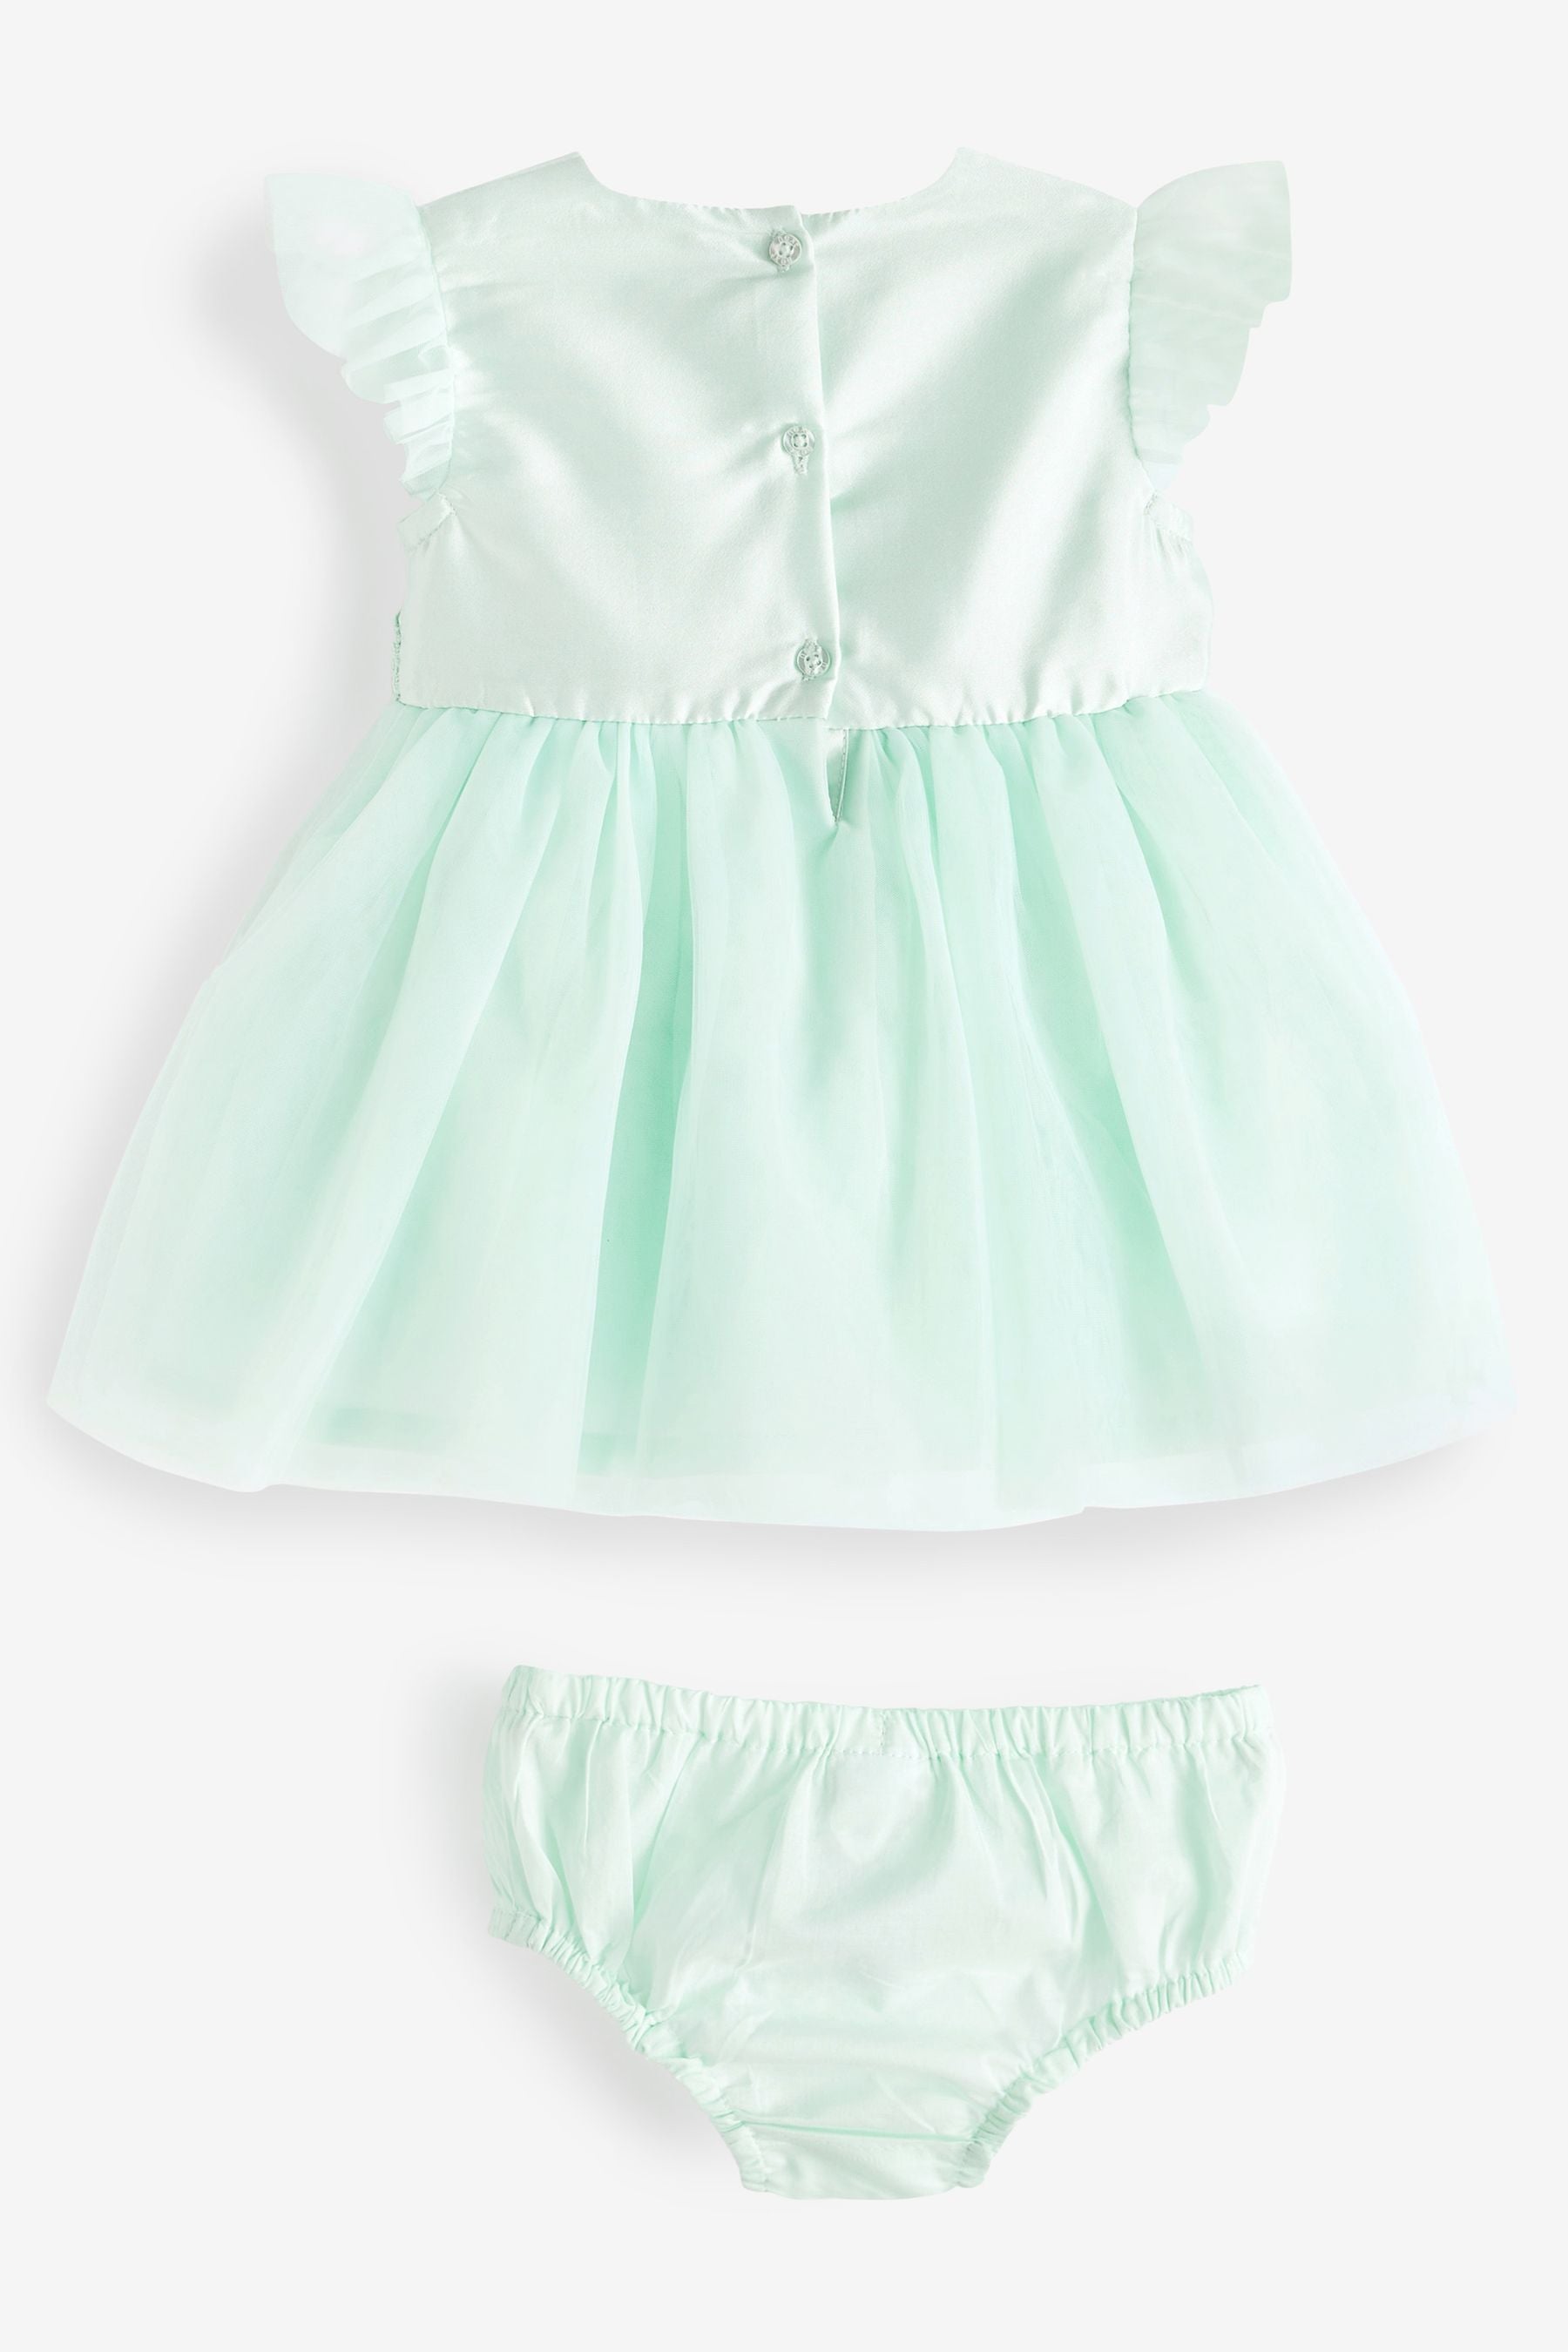 Mint Green Baby Occasion Dress, Knickers and Headband Set (0mths-2yrs)